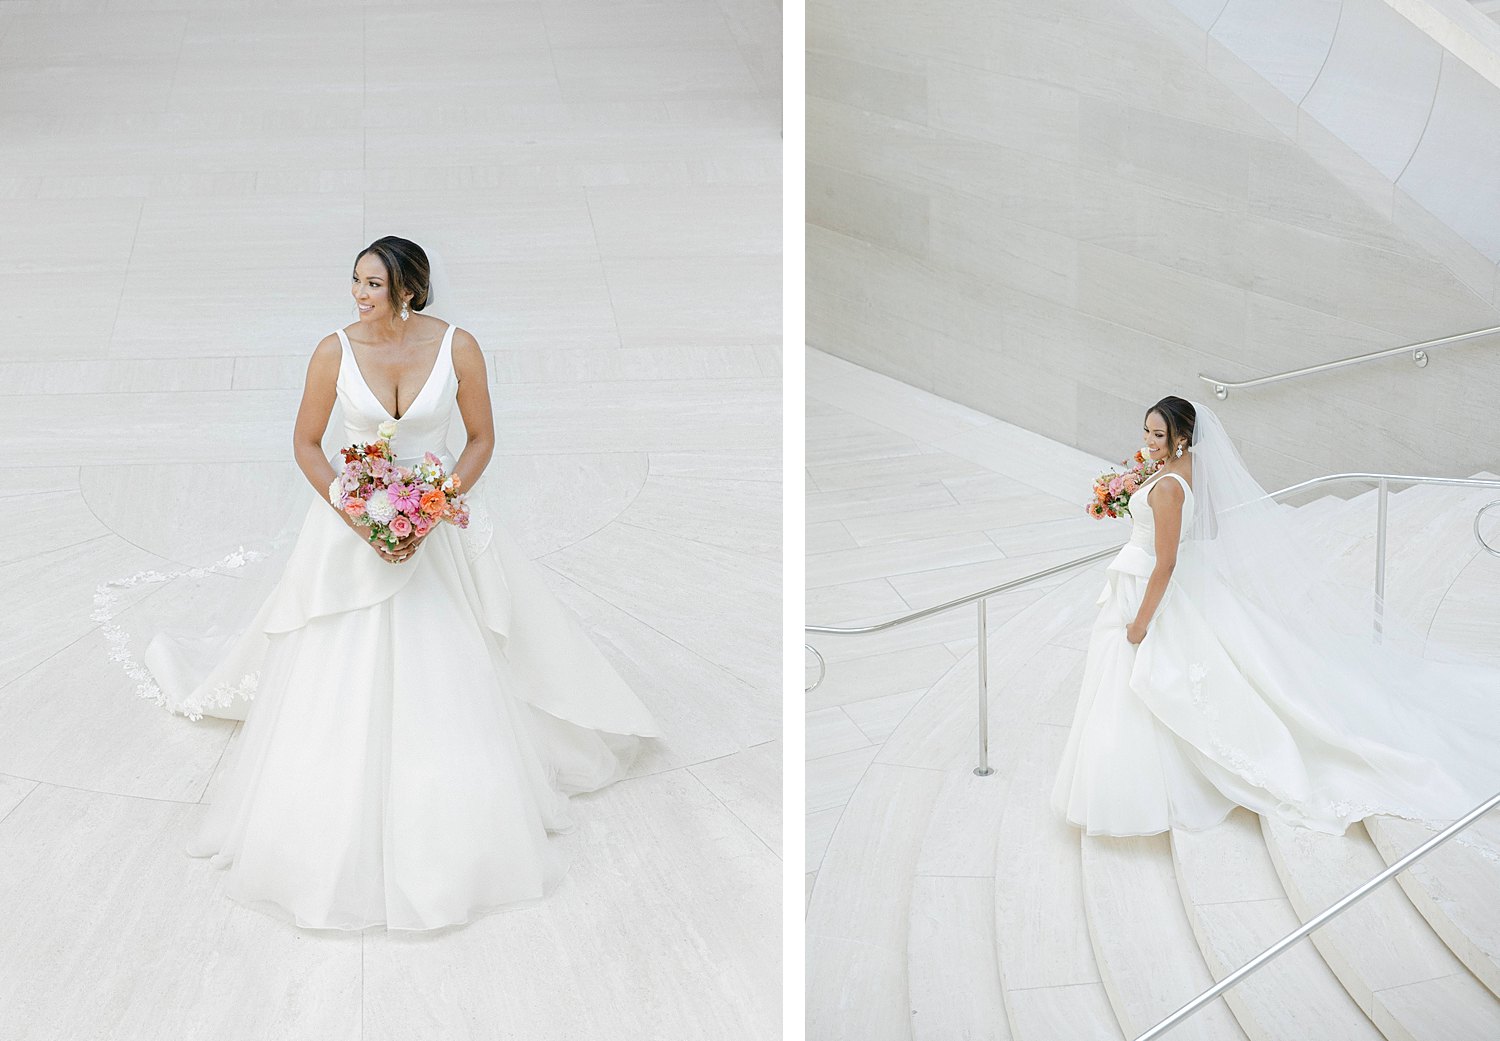 Bride in white wedding dress holding bouquet and walking down stairs